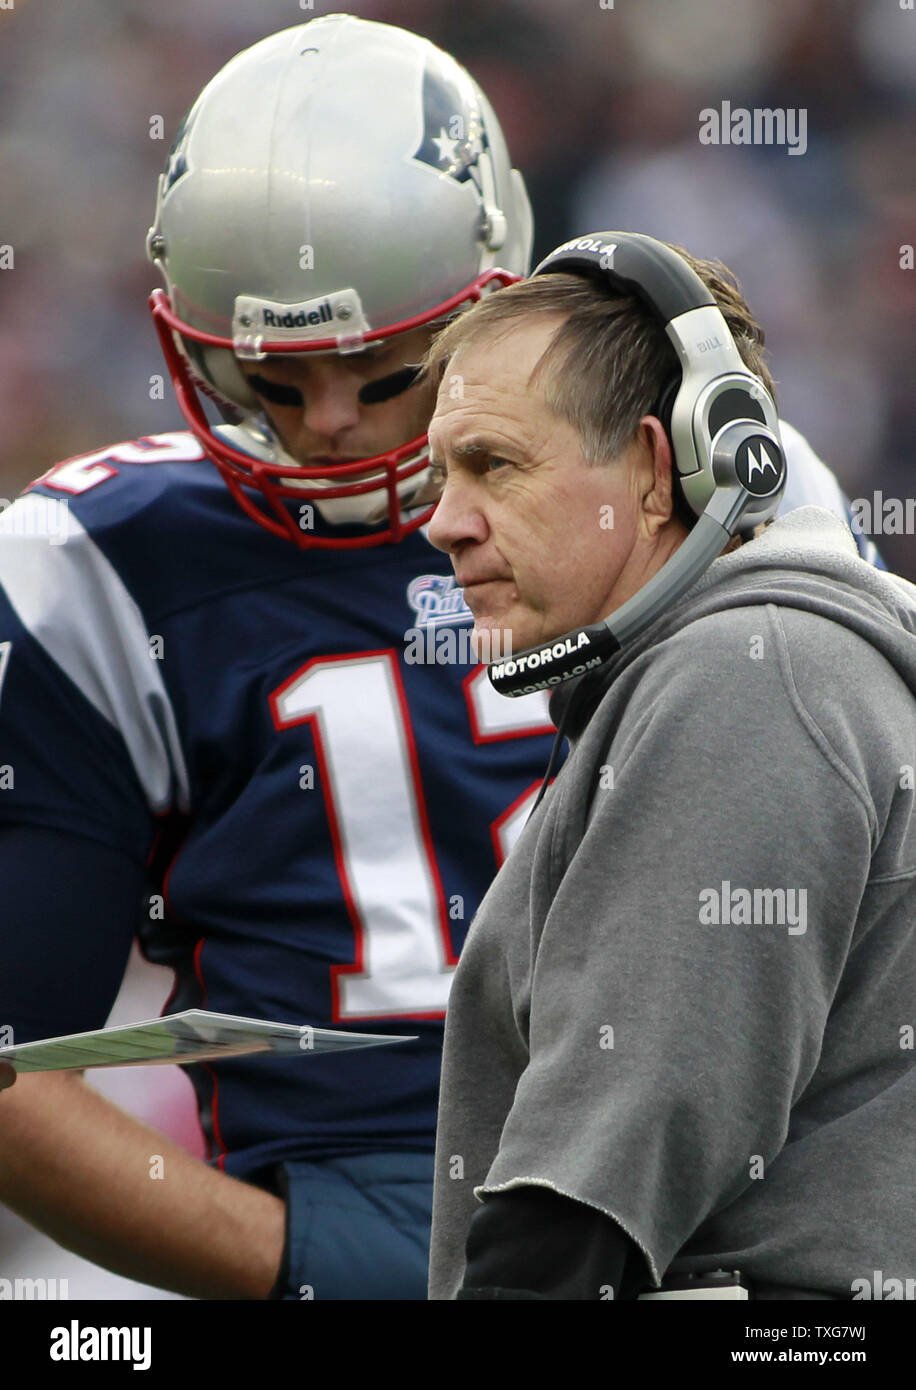 New England Patriots quarterback Tom Brady (12) confers with head coach Bill Belichick (R) in the first quarter against the Indianapolis Colts at Gillette Stadium in Foxboro, Massachusetts on December 4, 2011.  The Patriots defeated the Colts UPI/Matthew Healey Stock Photo